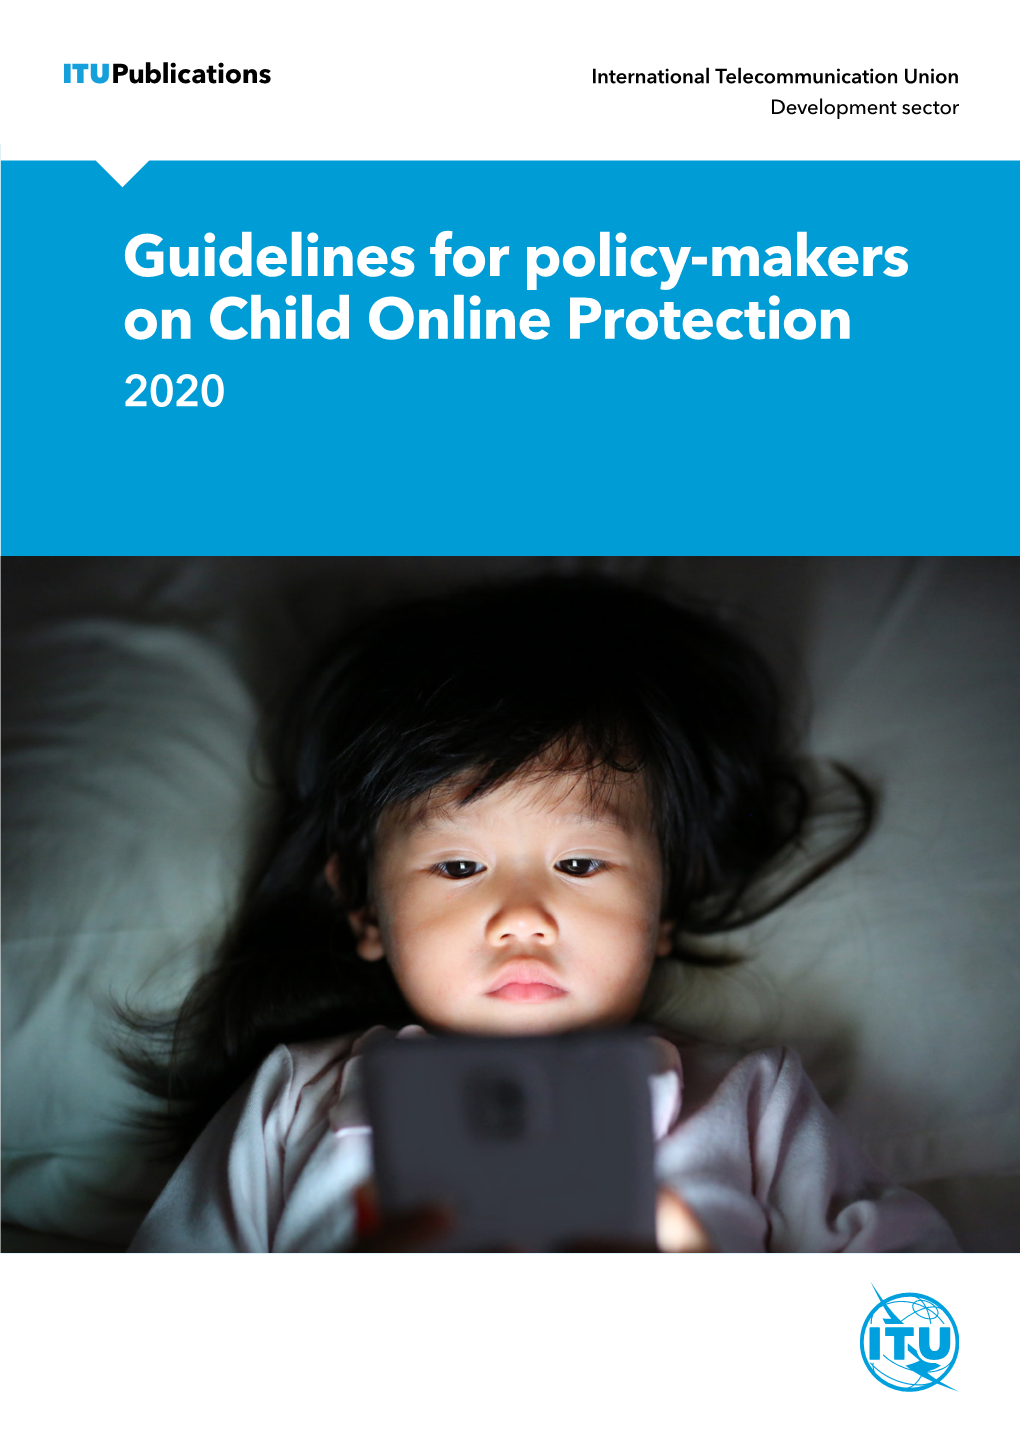 Guidelines for Policy-Makers on Child Online Protection 2020